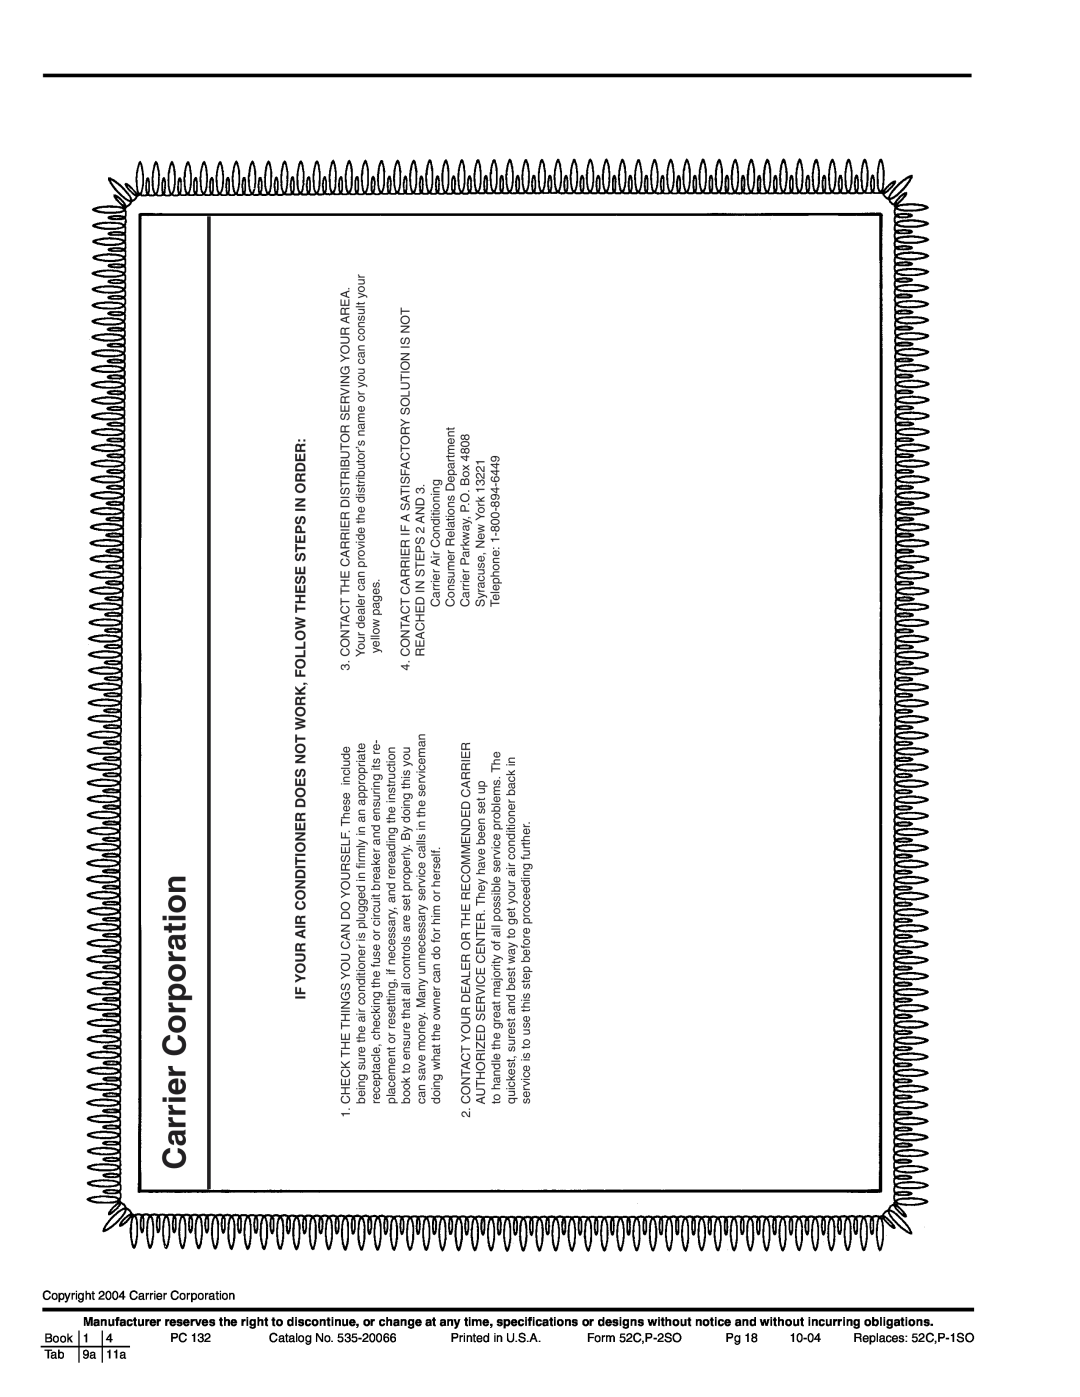 Carrier 52P owner manual Carrier Corporation, reserves, without incurring obligations 